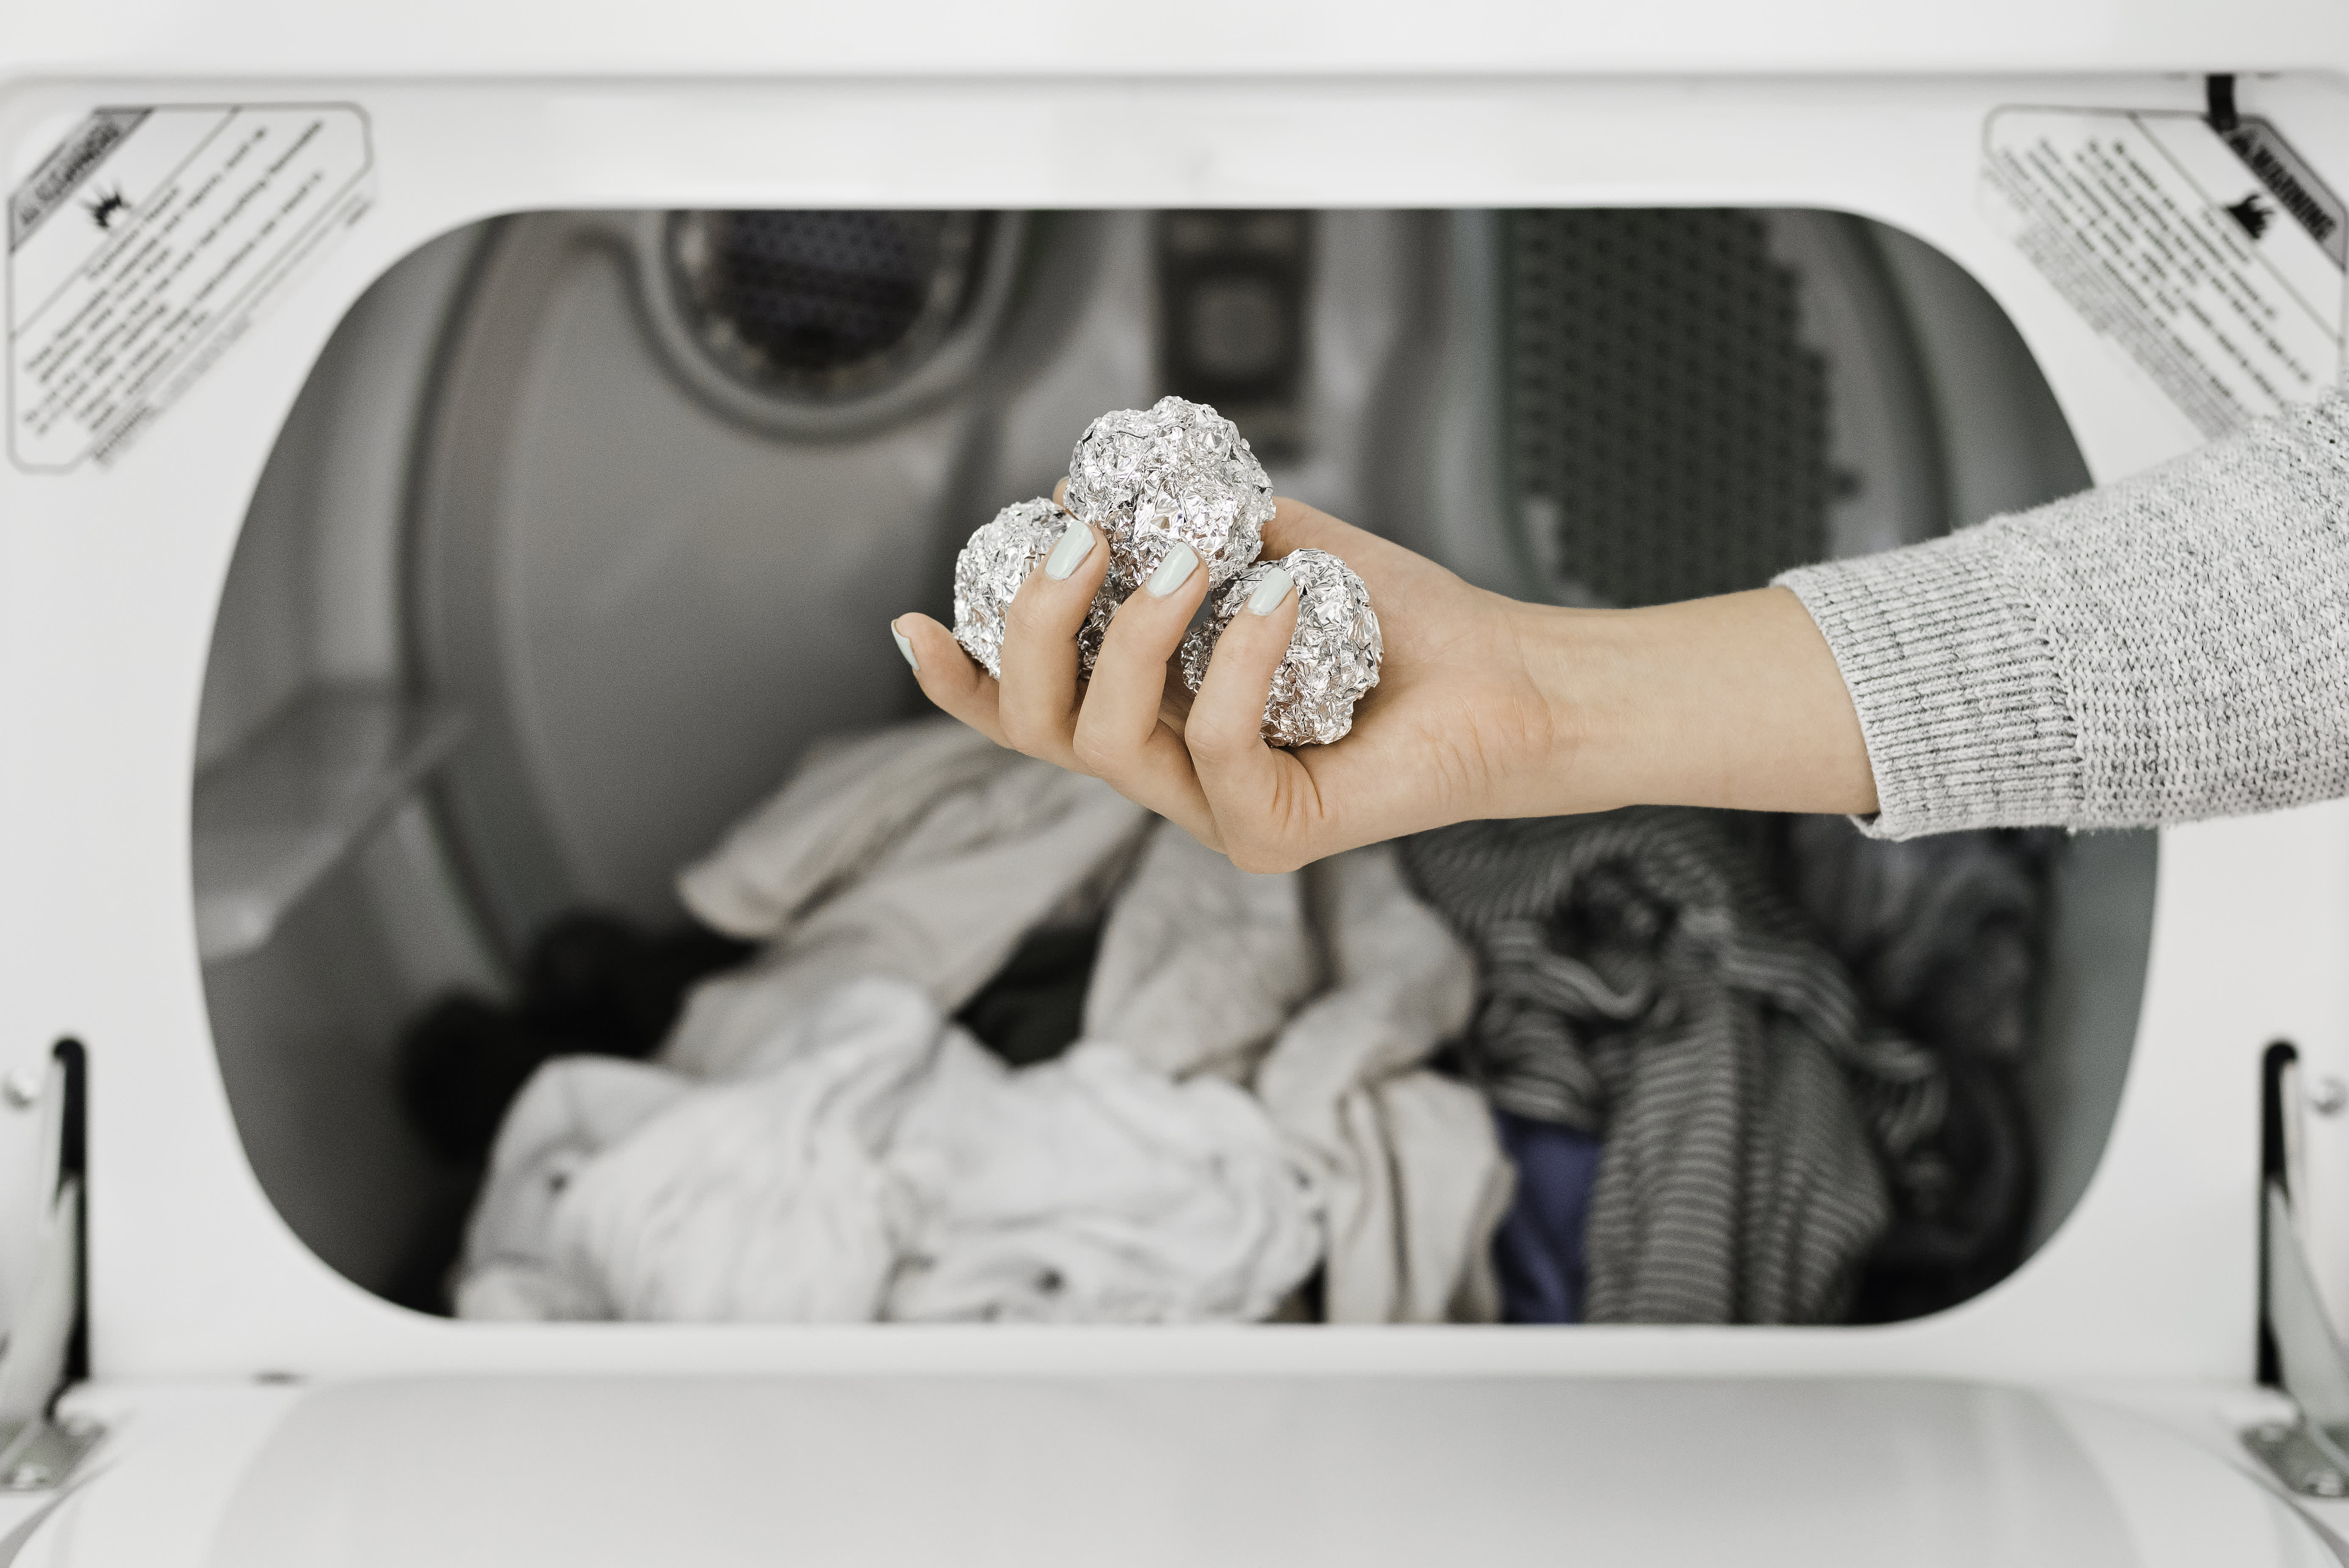 Does Putting Aluminum Foil In Your Dishwasher Work?